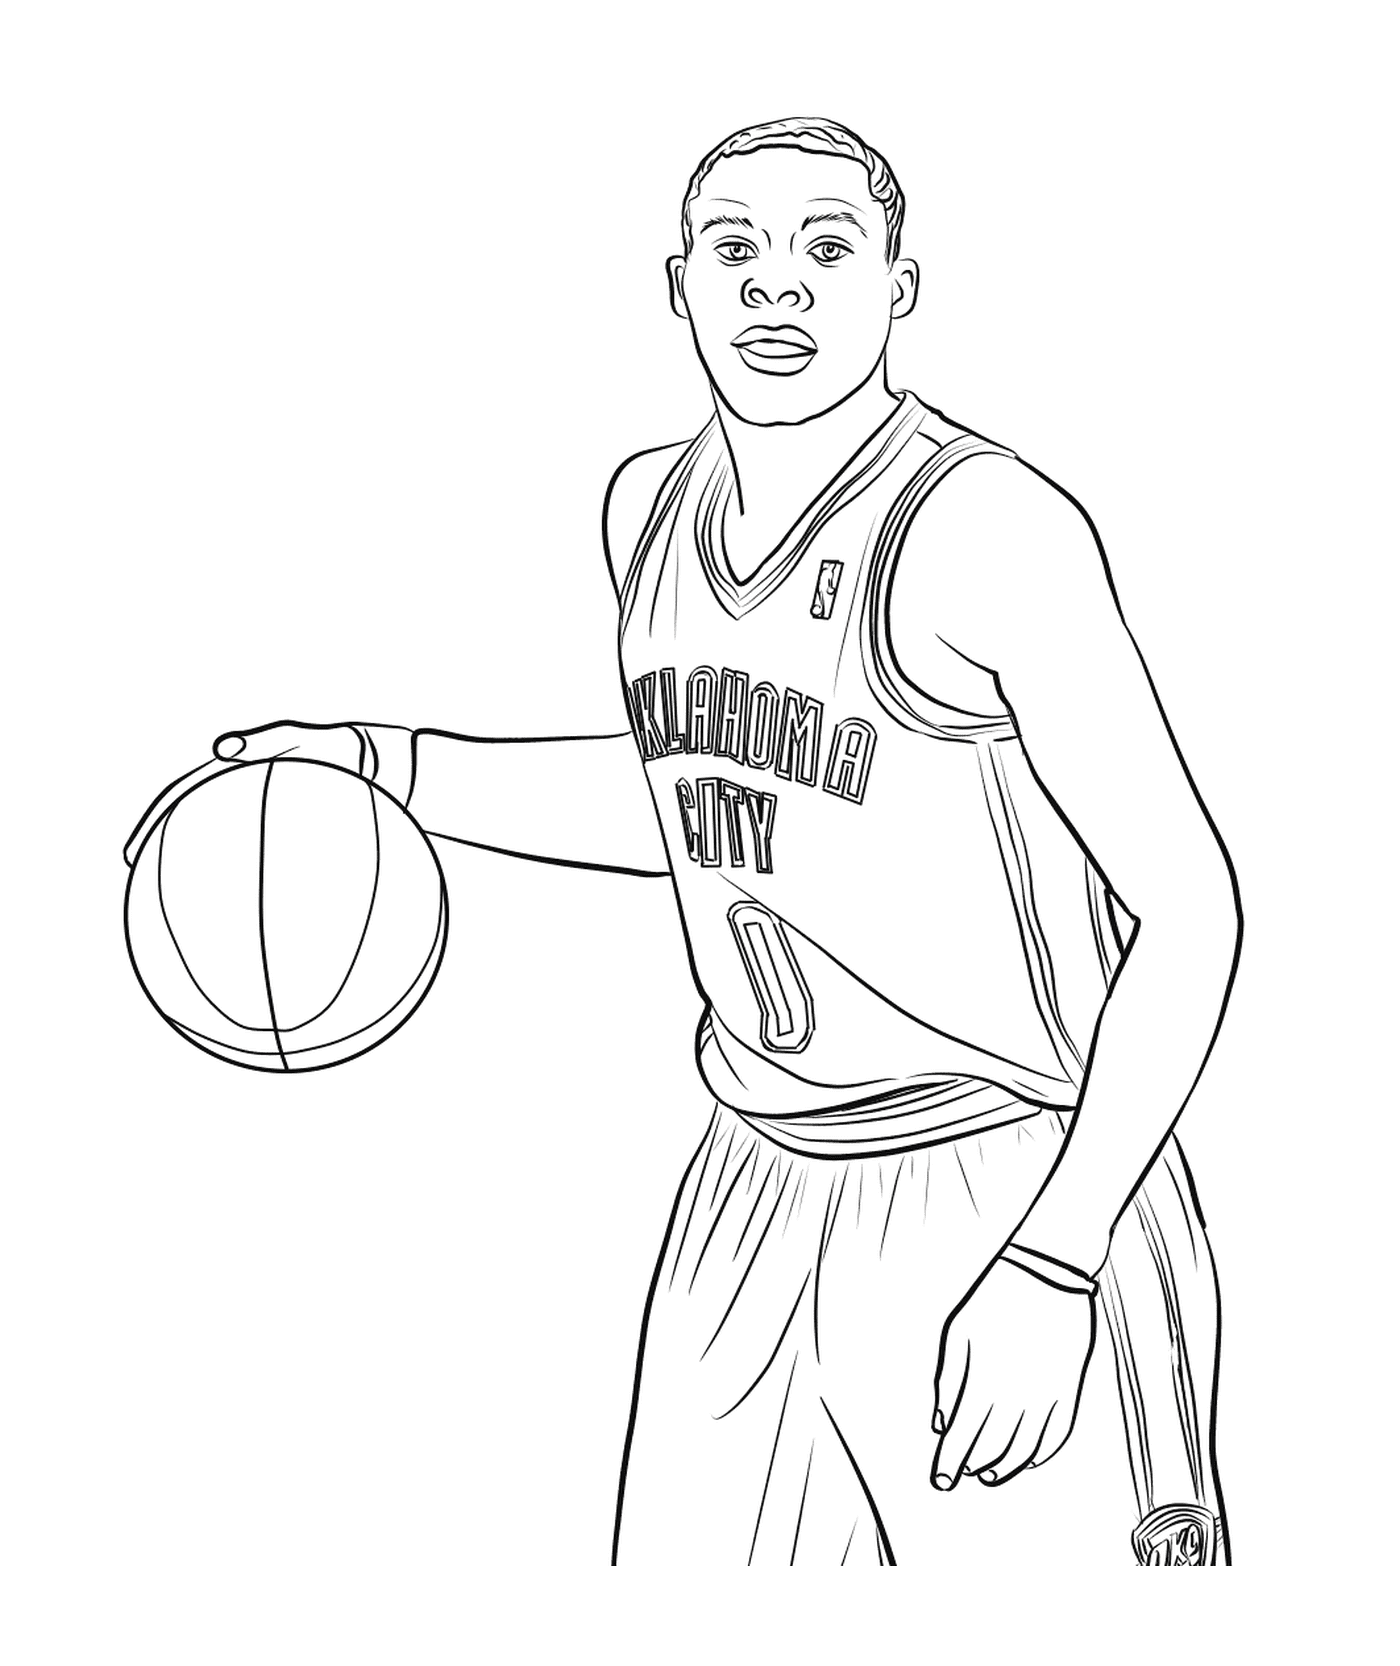  Russell Westbrook, basketball player 